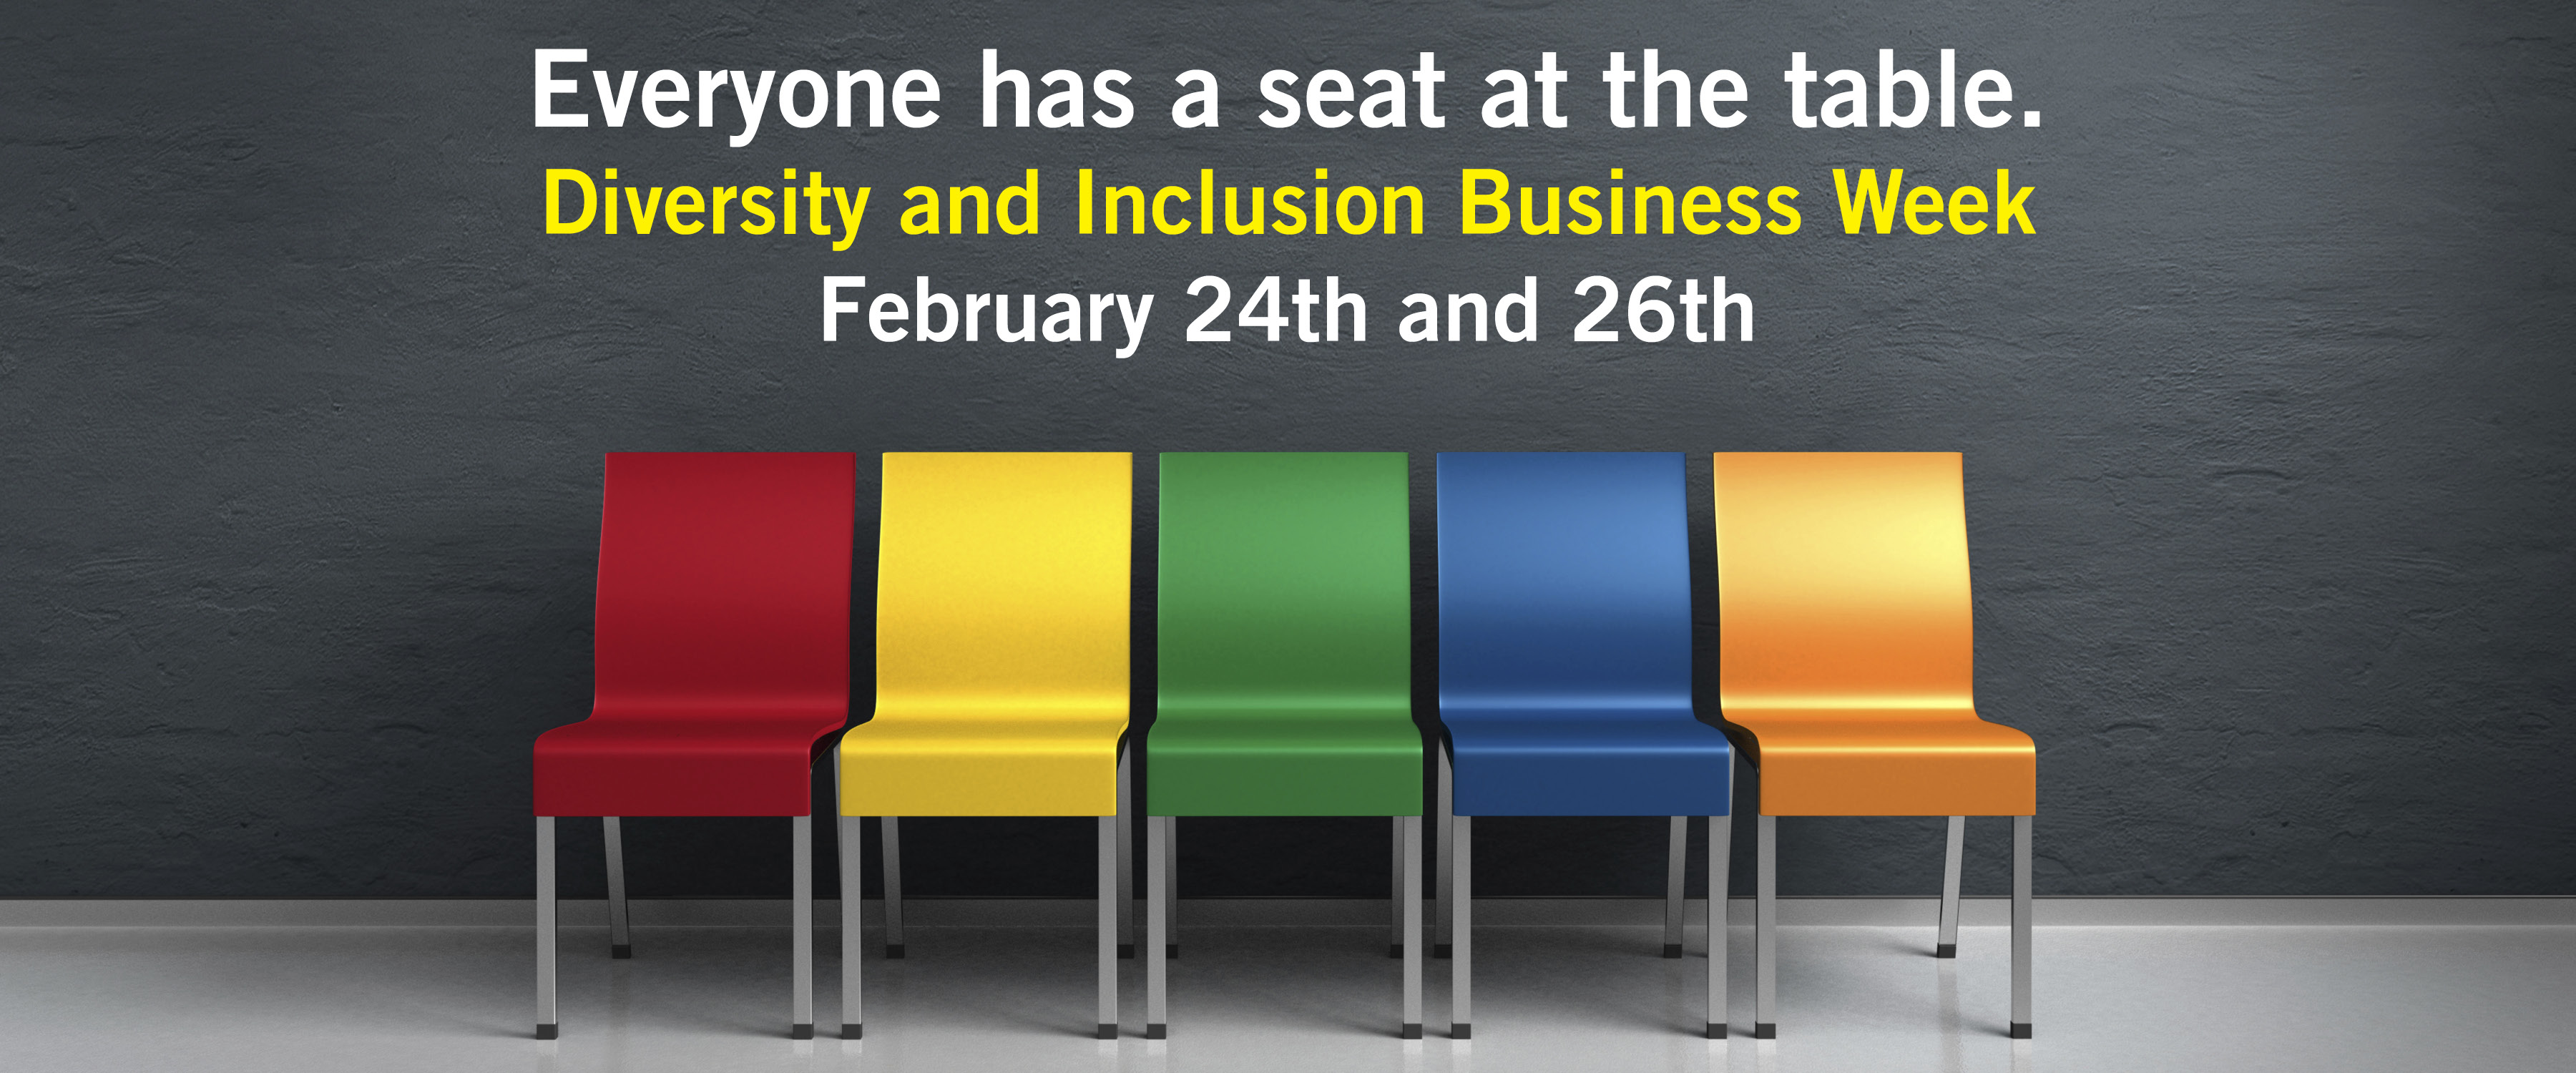 Diversity and Business Inclusion Week